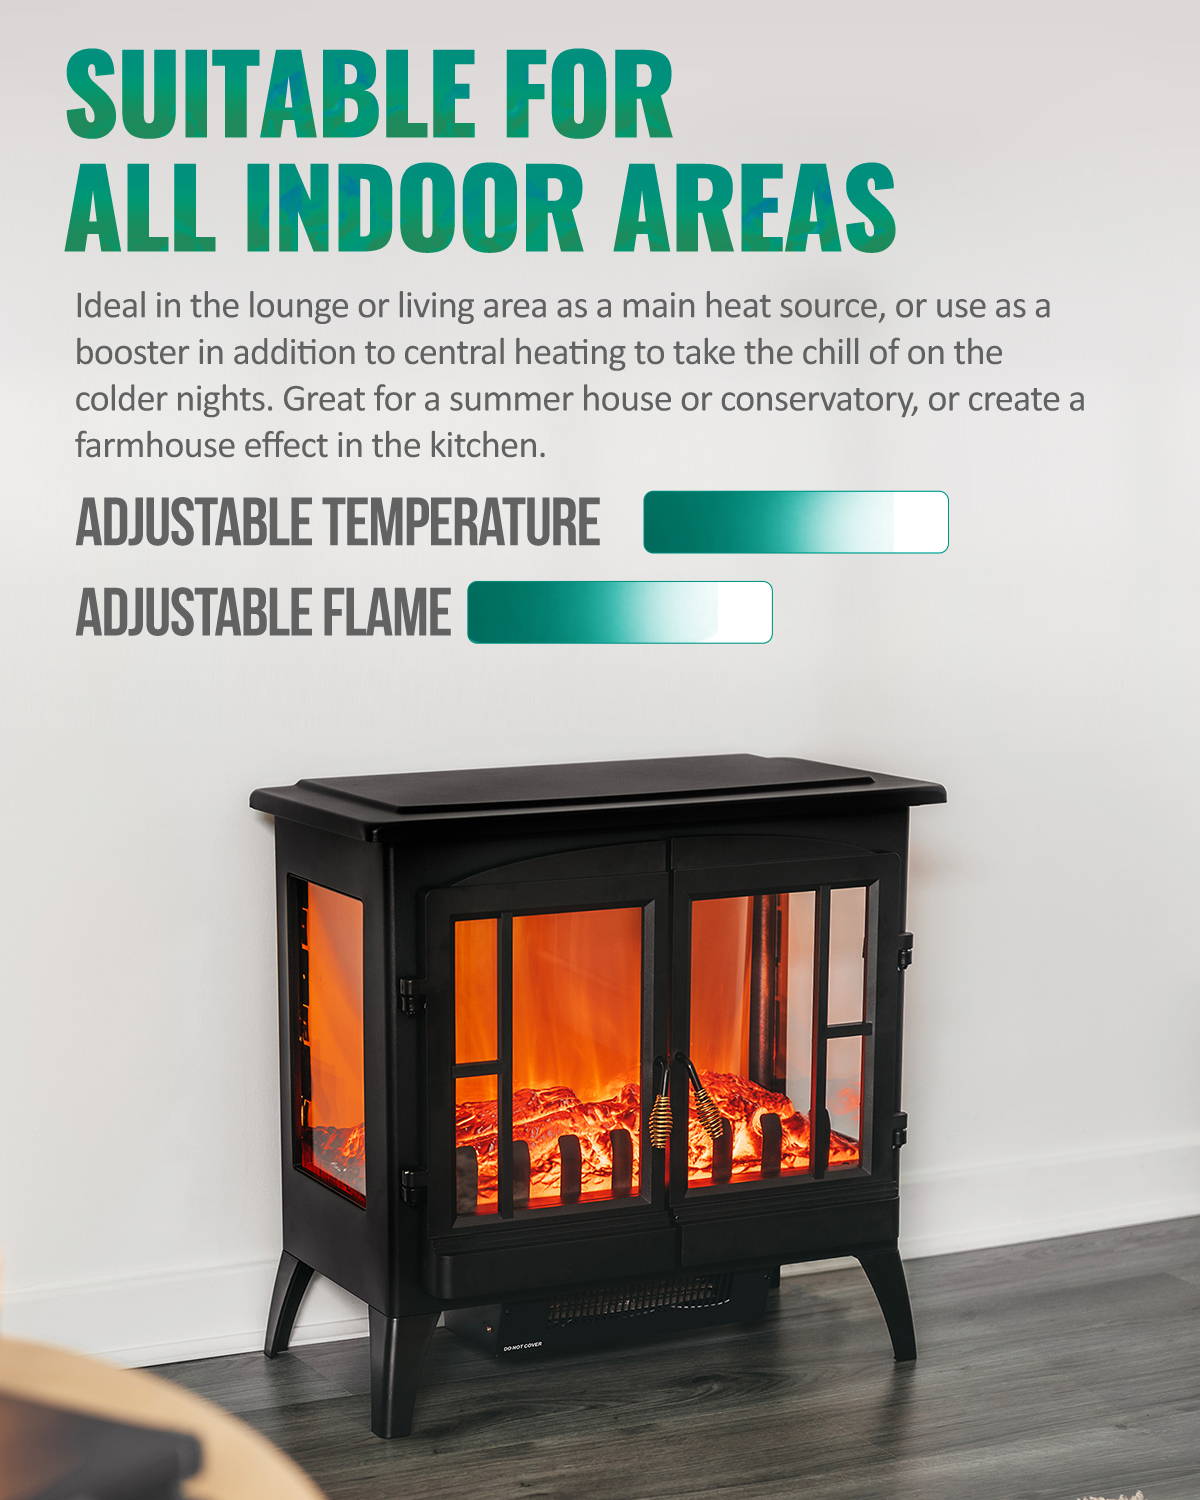 Suitable For All Indoor Areas